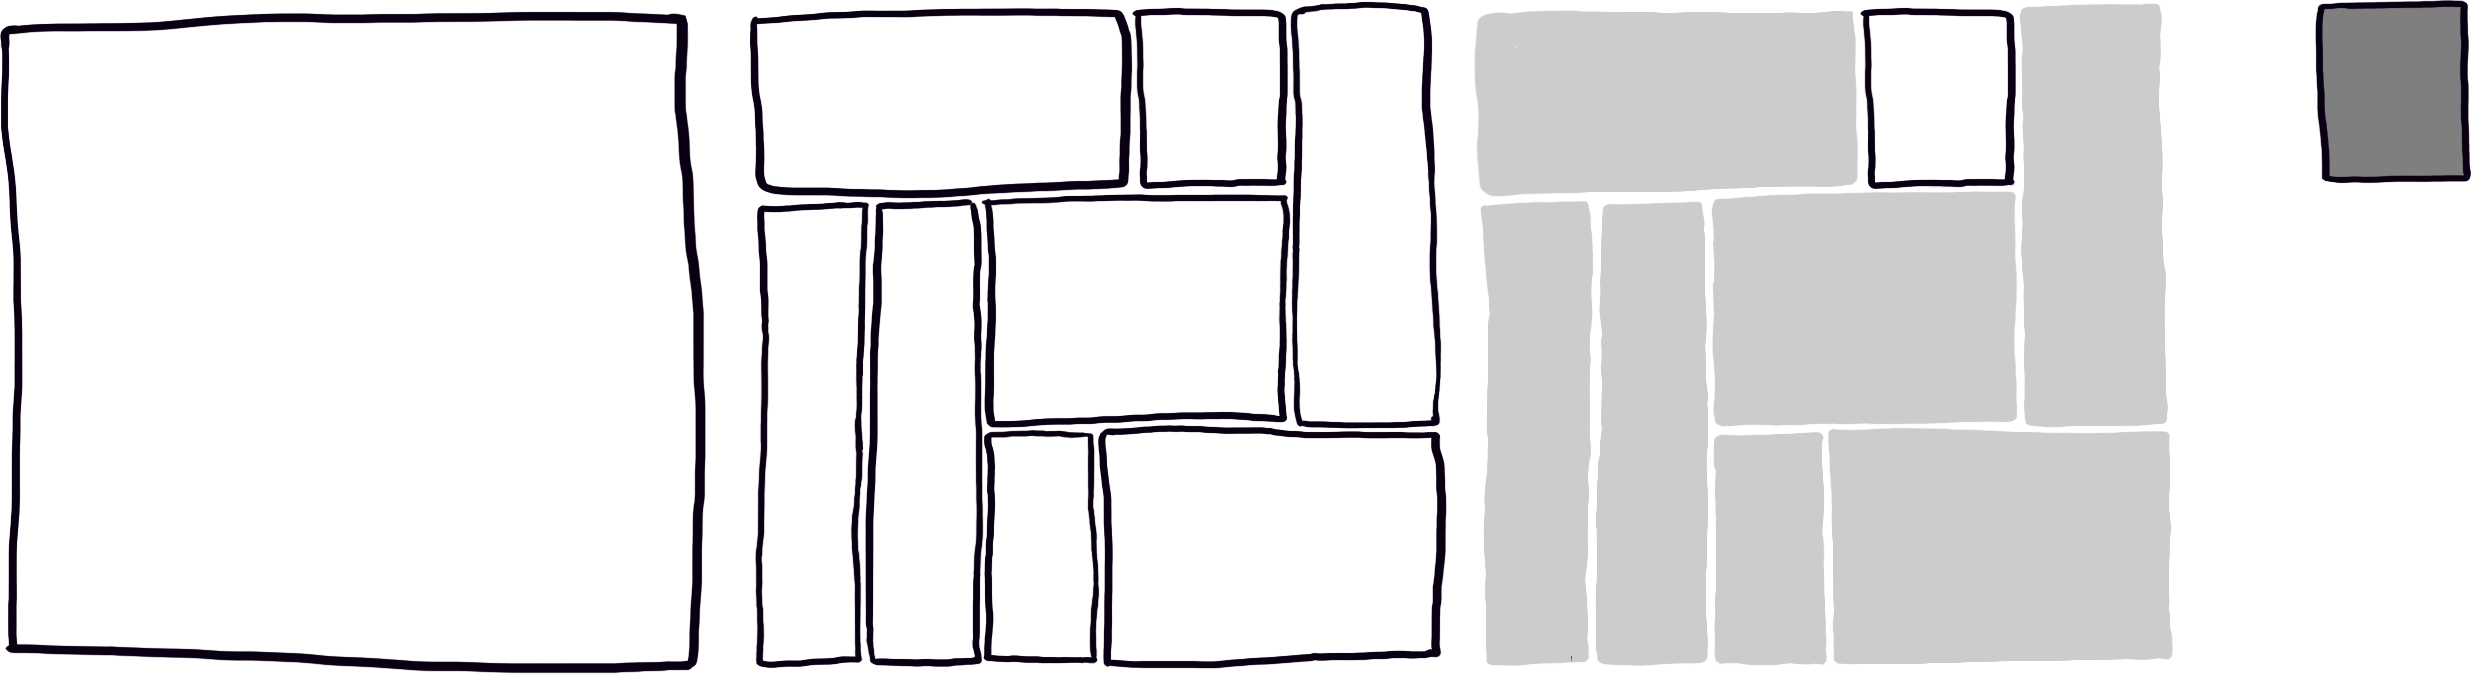 Four squares in a row. The first just has an outline (boundaries have been identified), the second is decomposed into smaller chunks (decomposition), the third has one chunk highlighted (prioritised), and the last has only the one chunk visible.